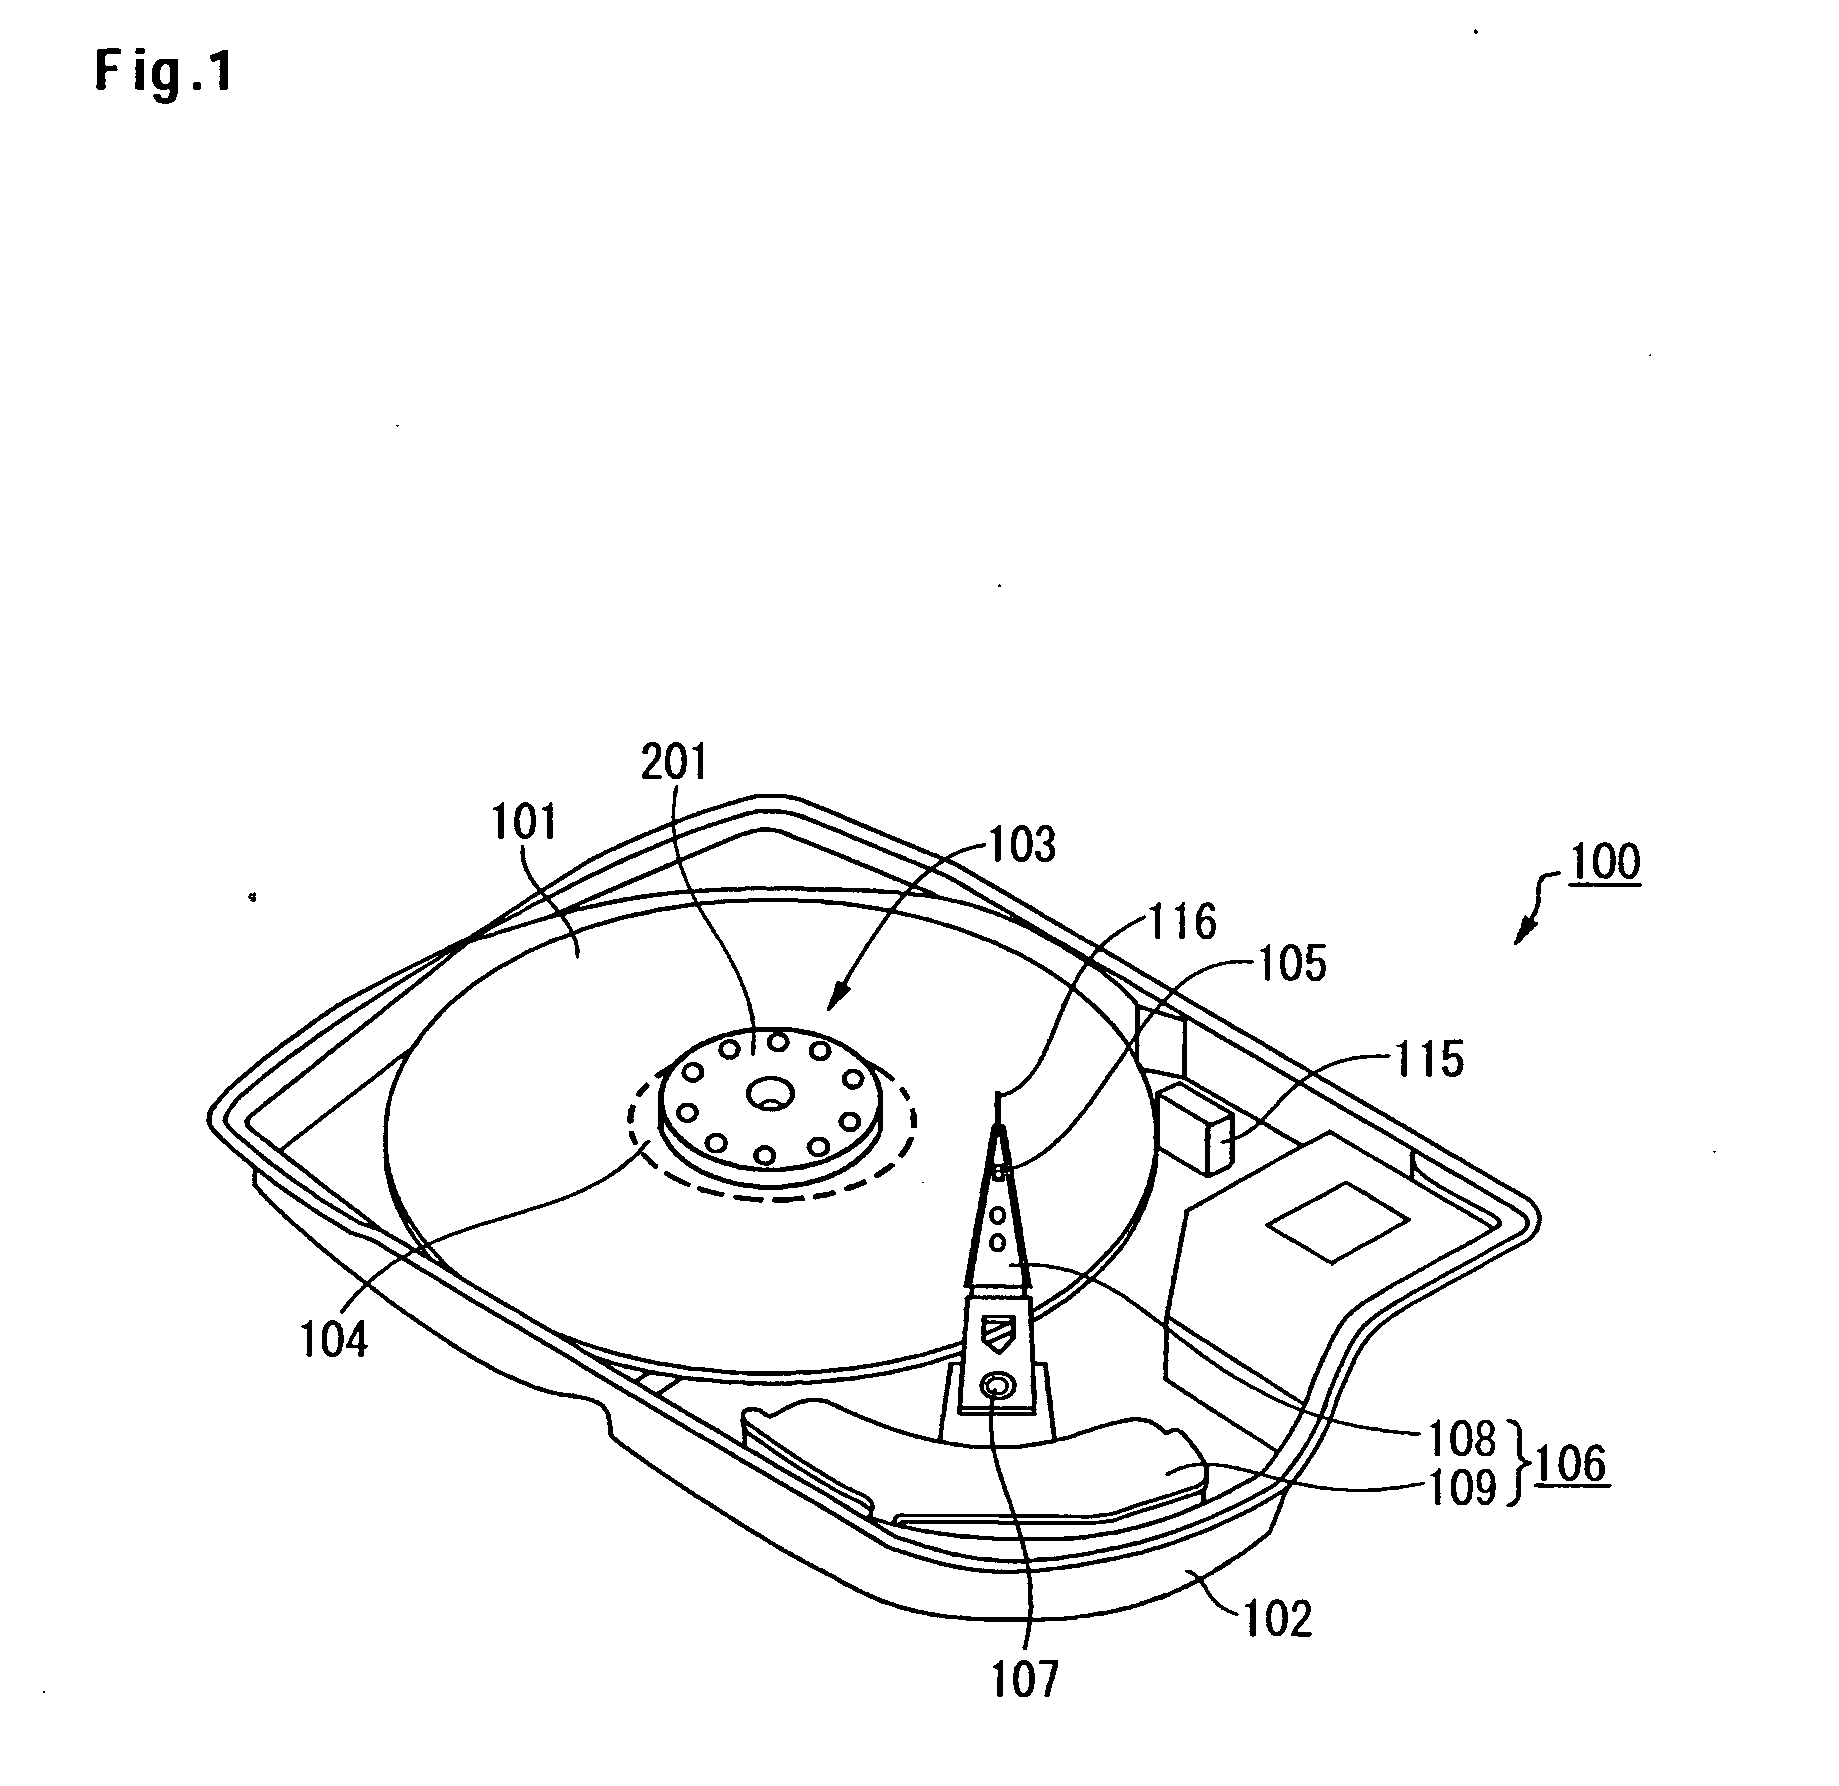 Data storage device with mechanism to control rotation of spindle motor